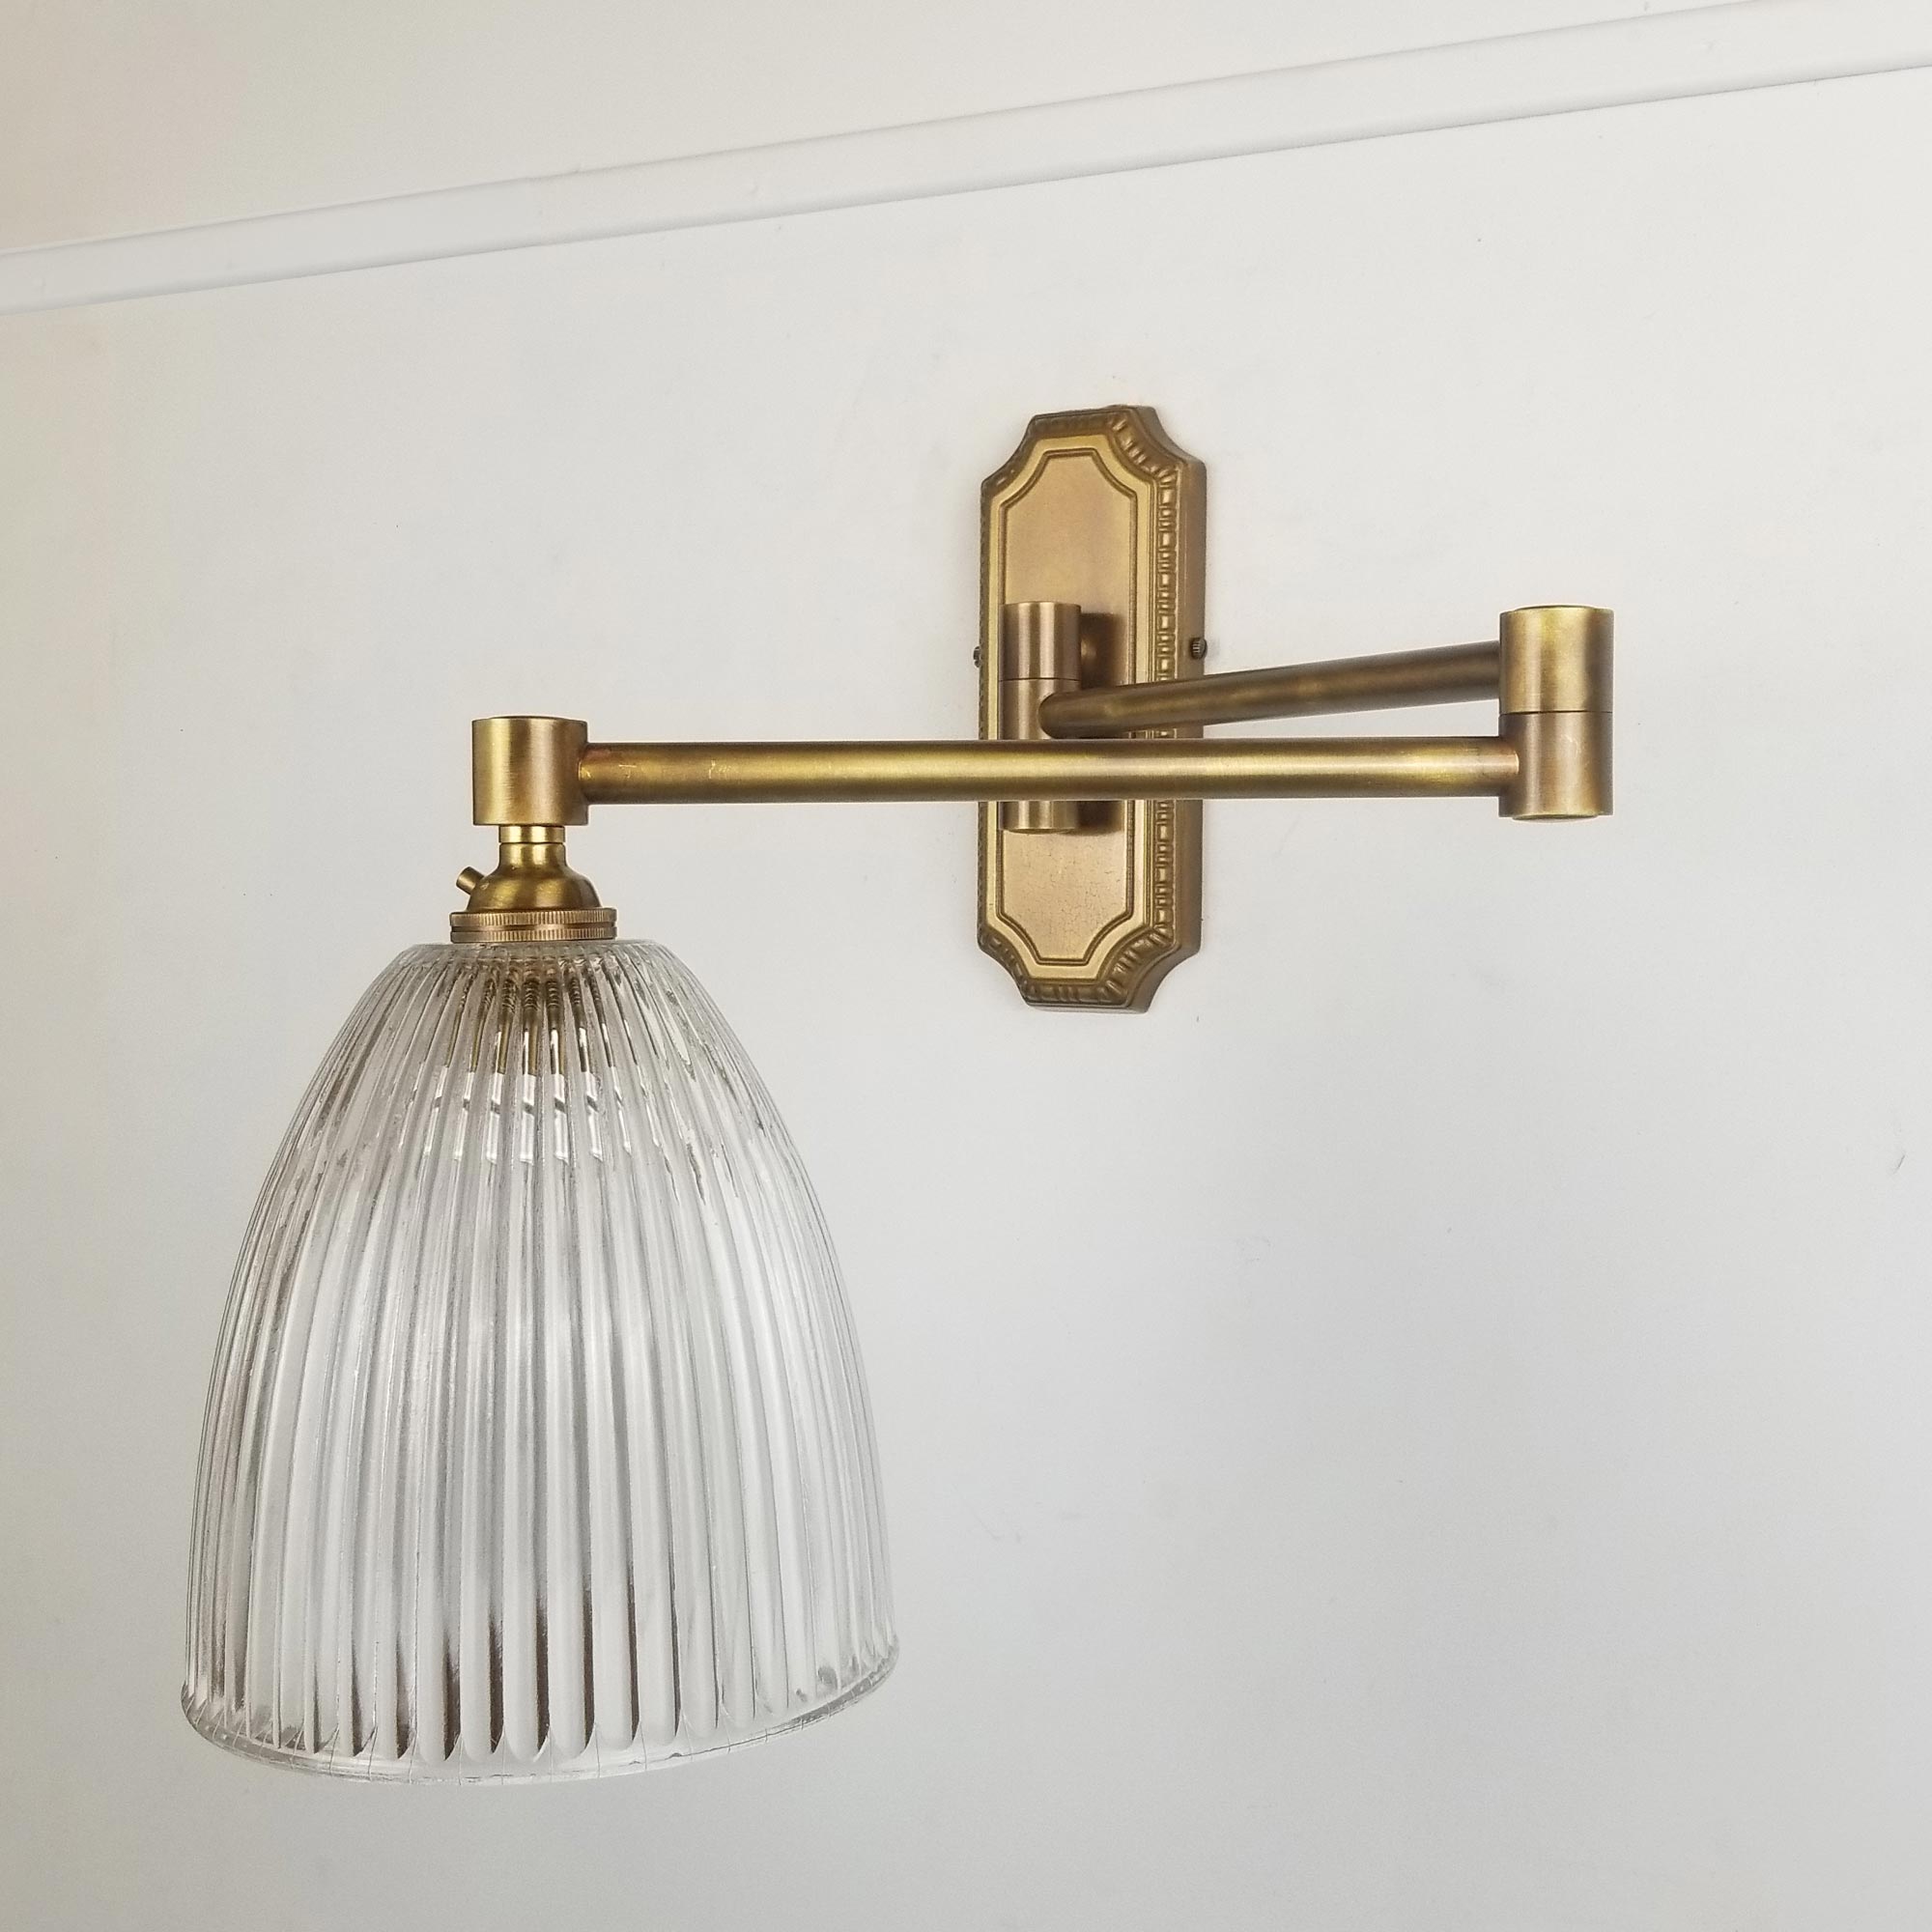 Double Swing Arm Brass Wall Light with Prismatic Glass Shade - E2 Contract  Lighting